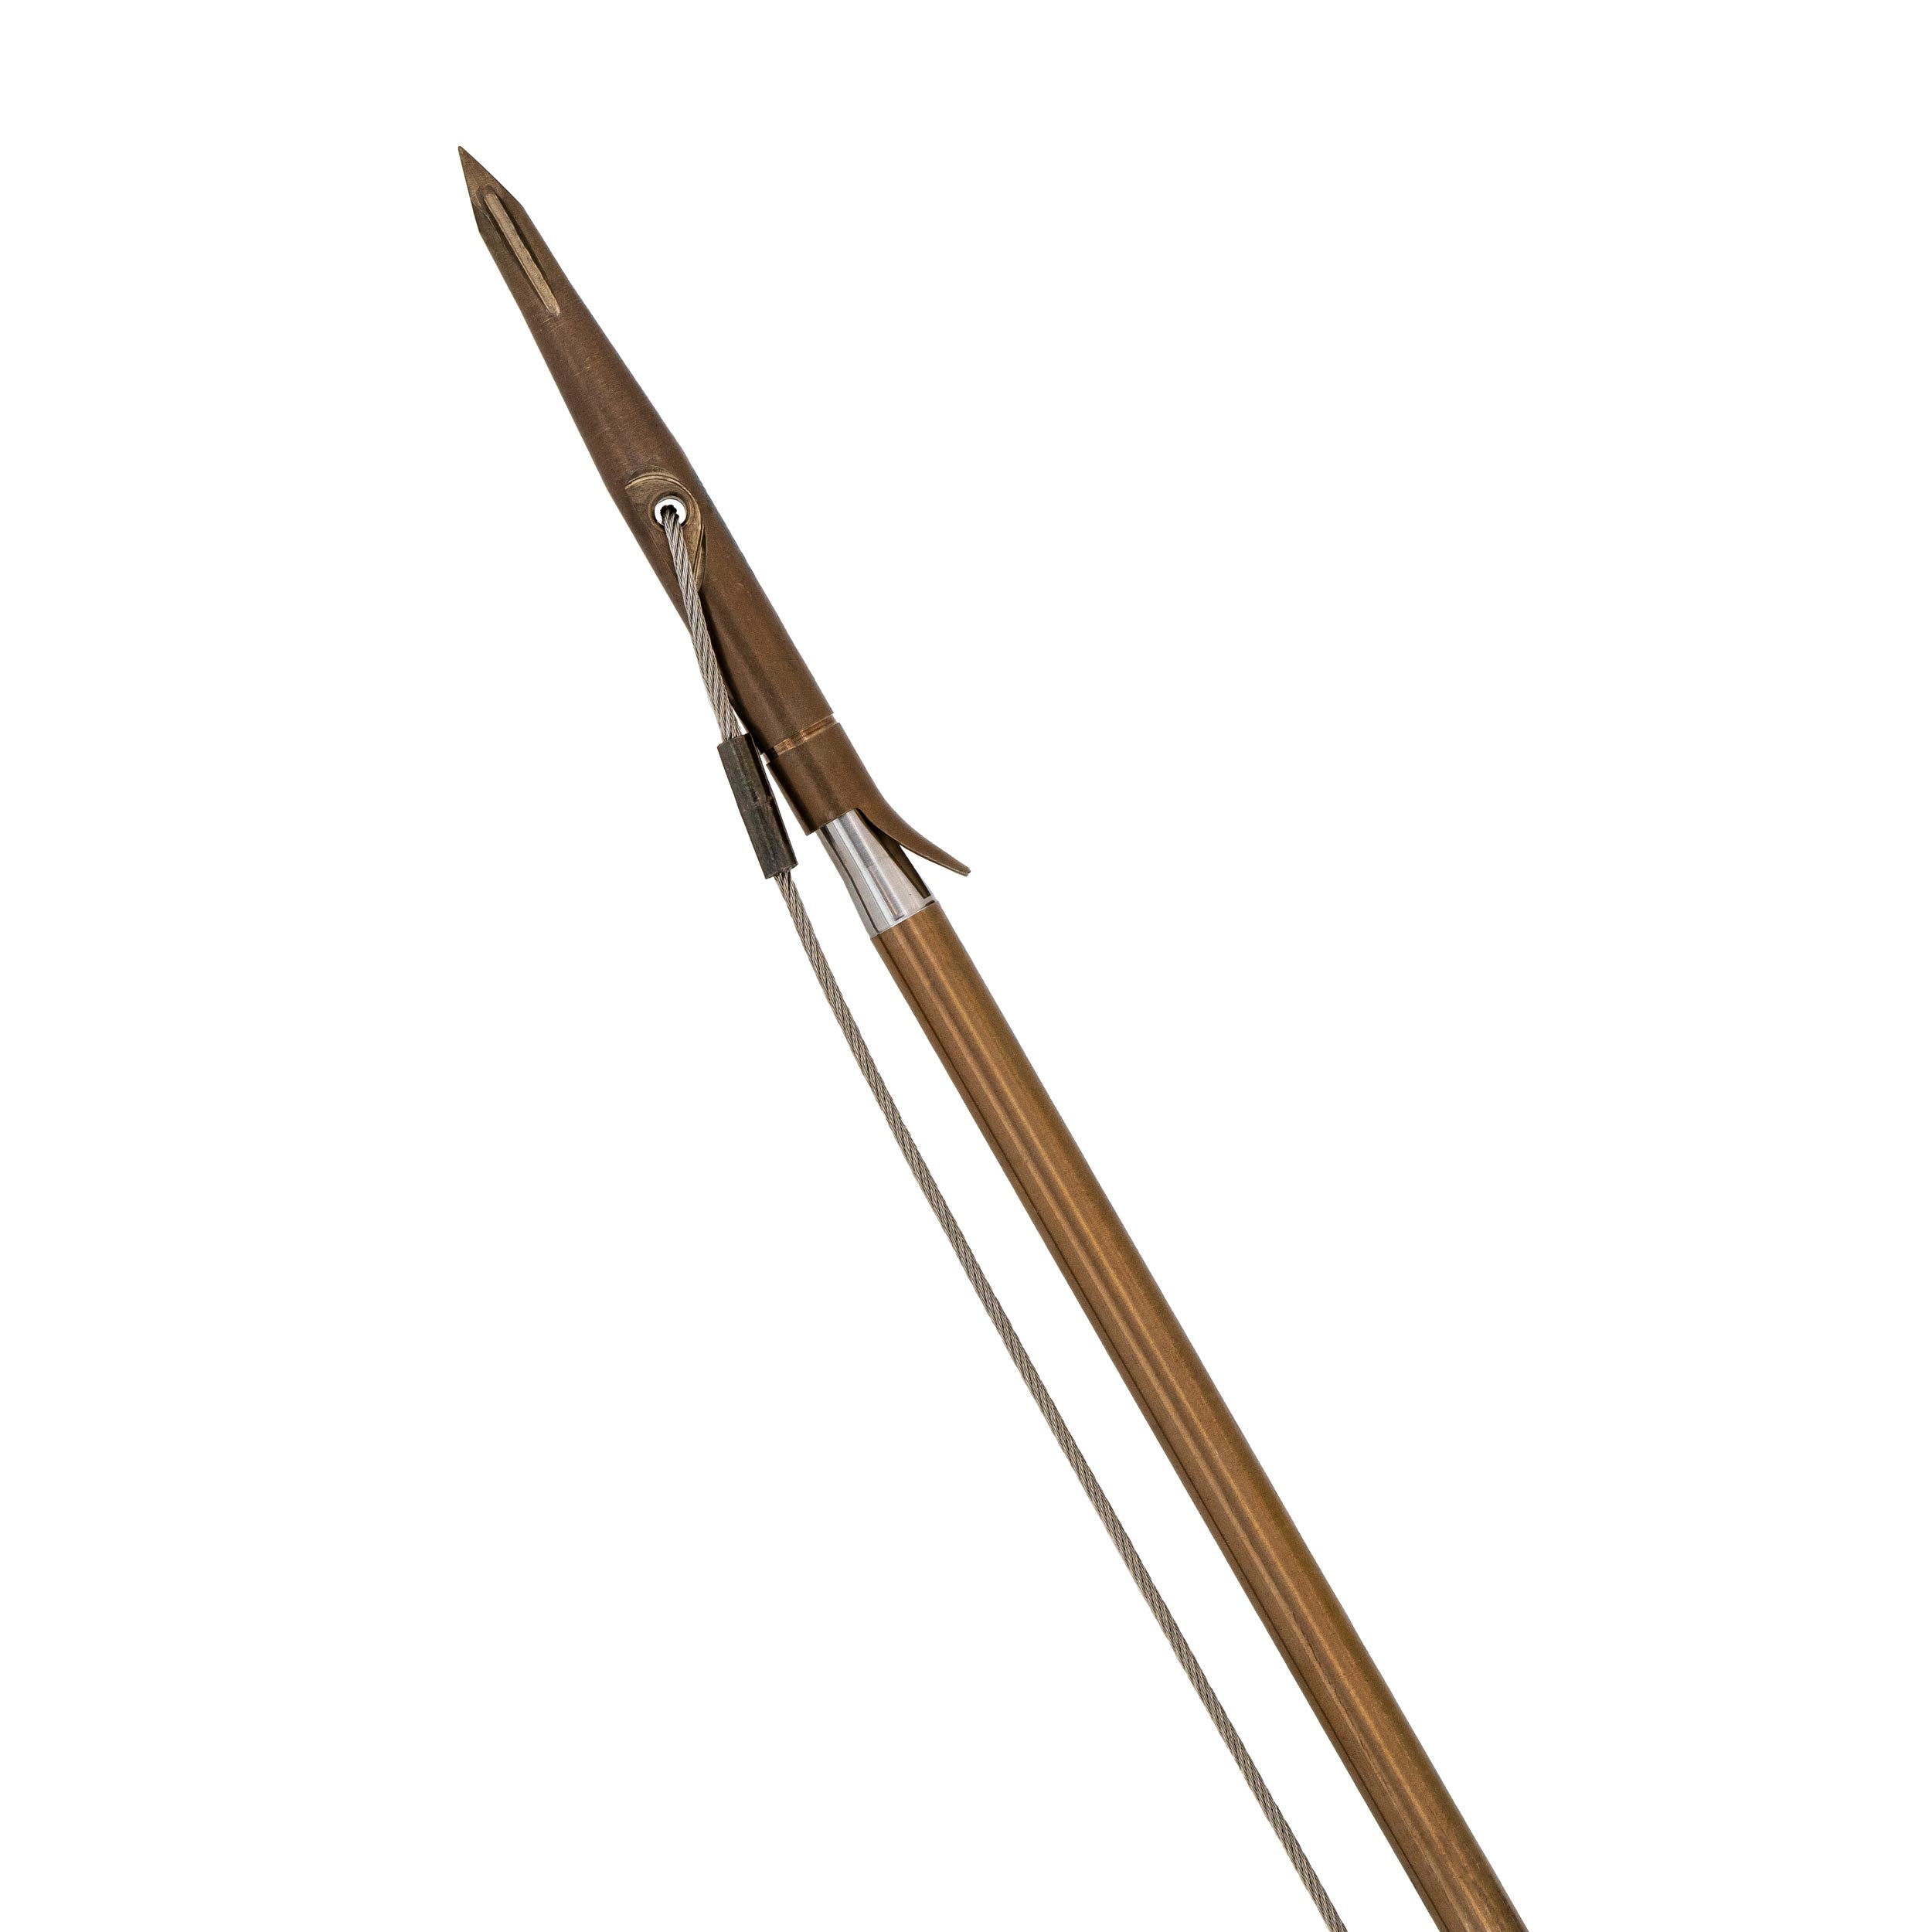 NOMAD Traditional Polespear